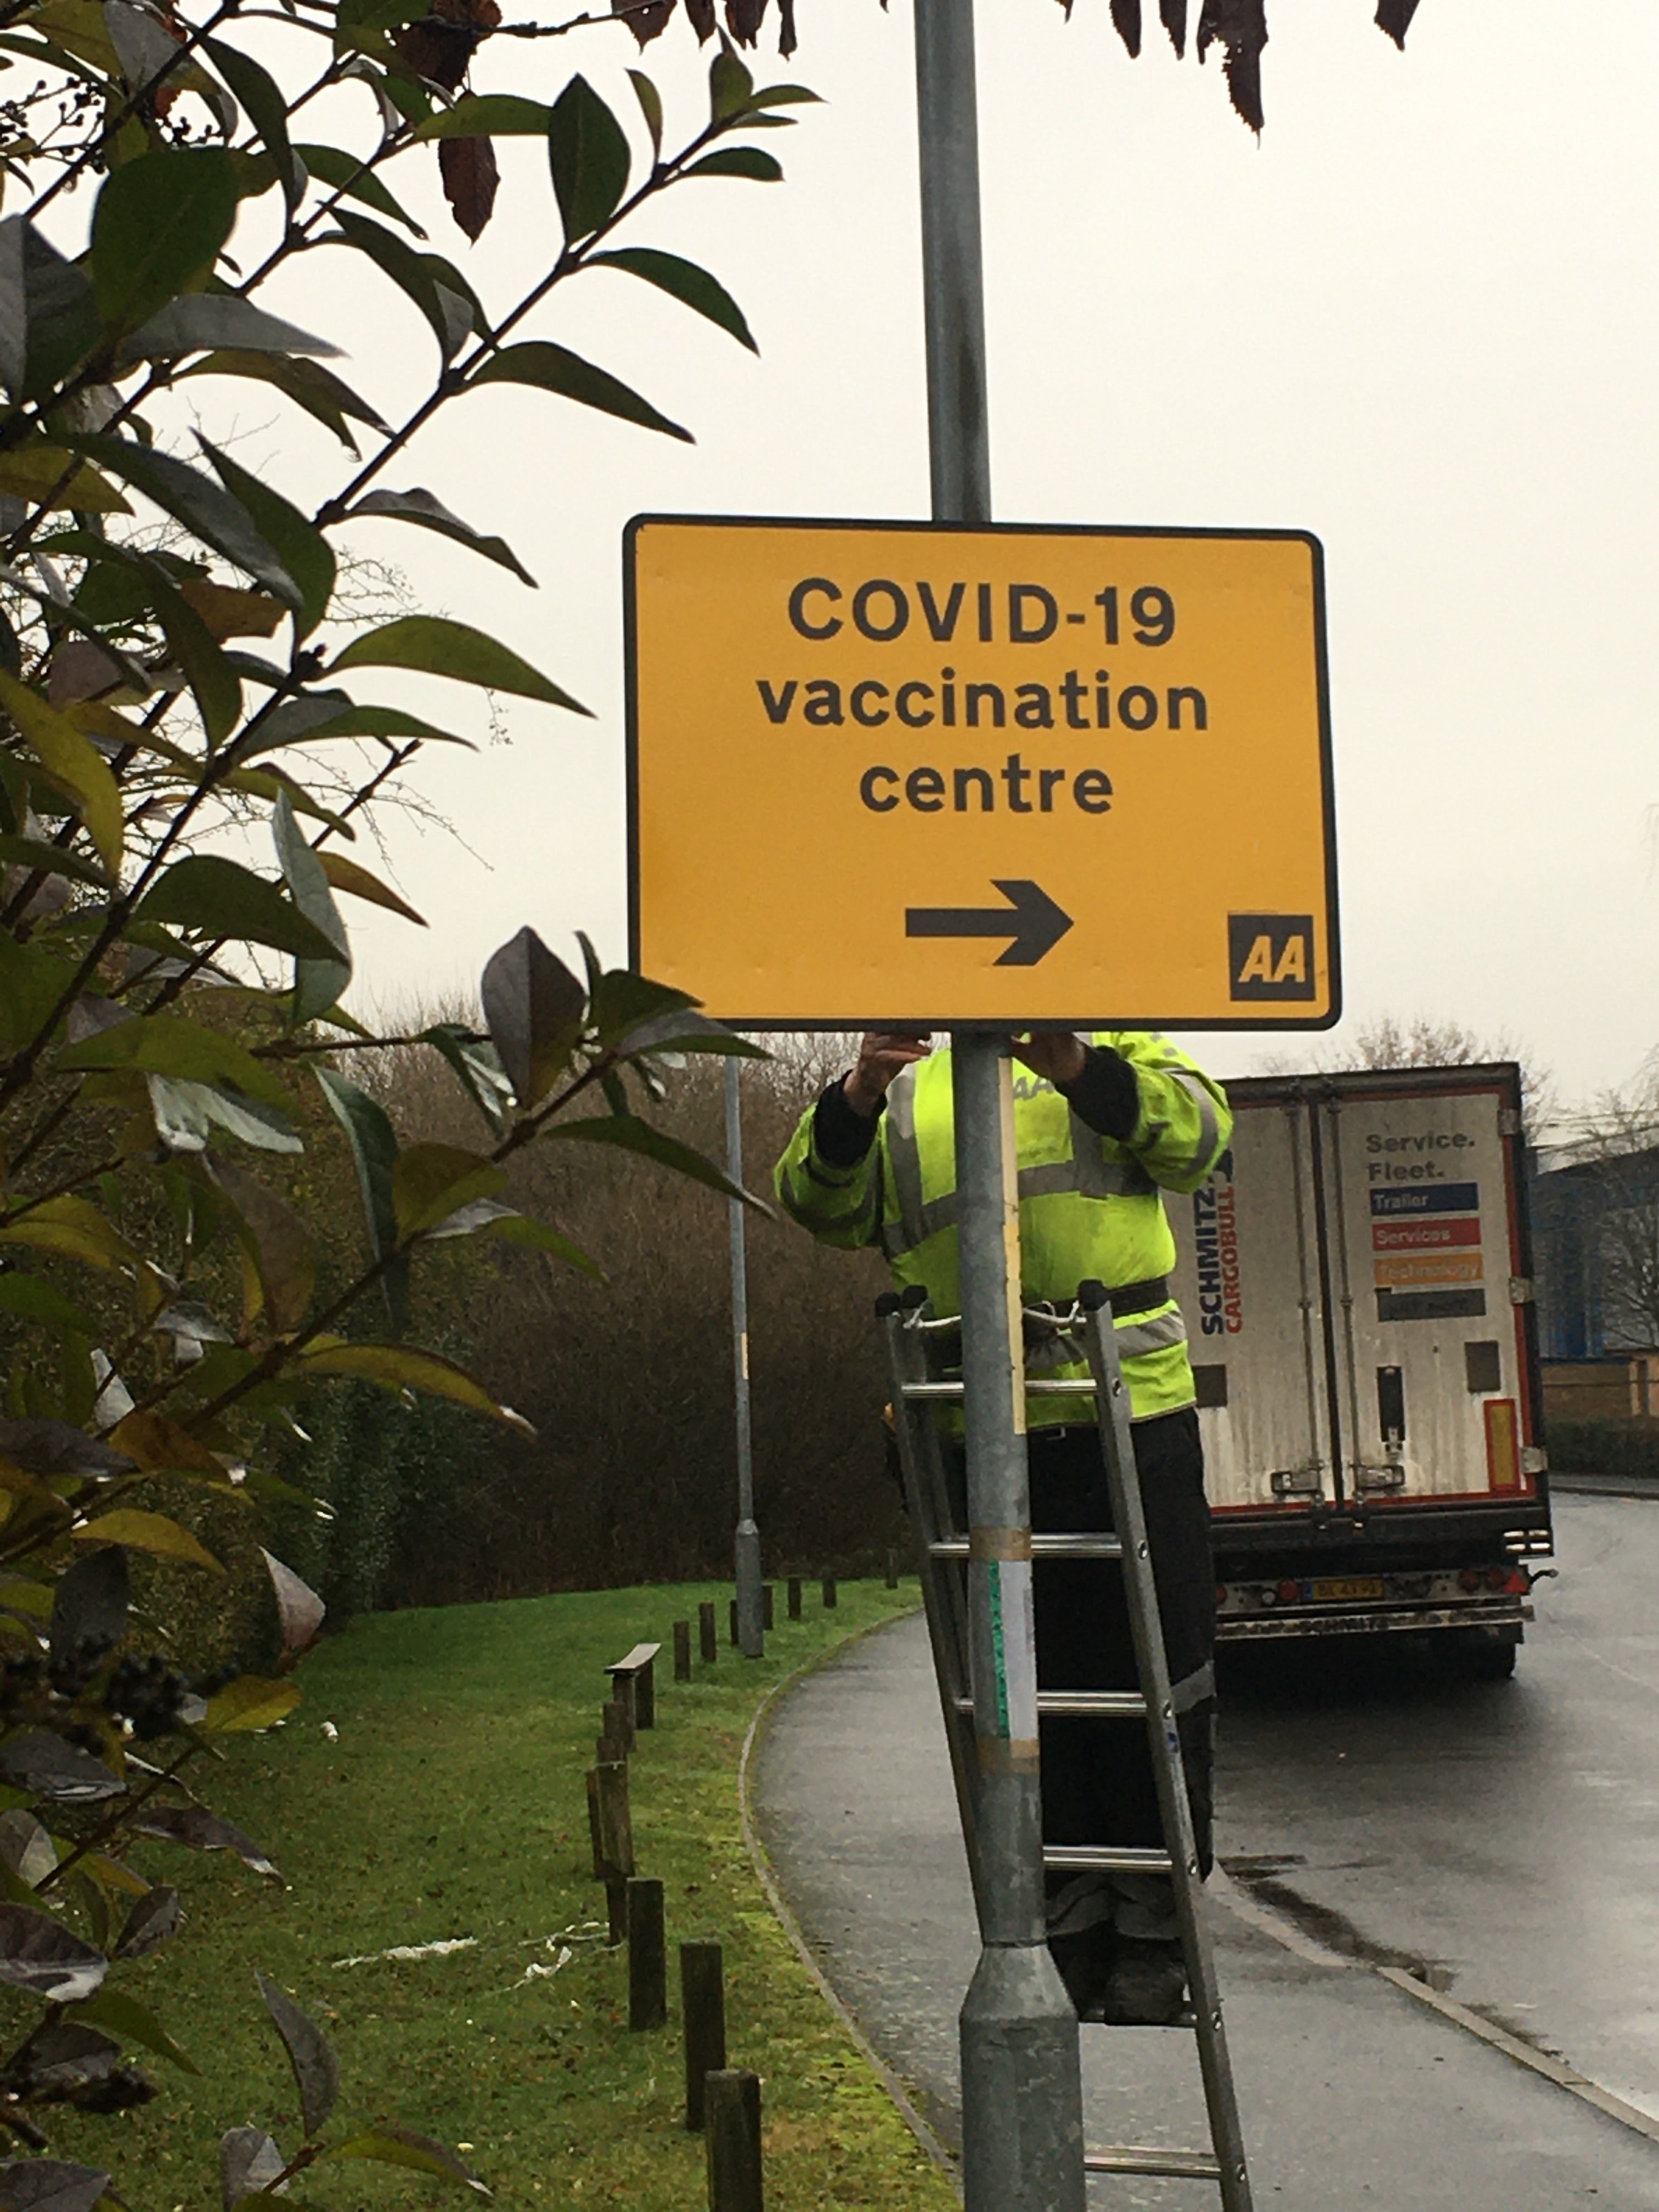 Thousands of new road signs will be installed to guide people to coronavirus vaccination centres following an agreement between the AA and the Government (AA/PA)